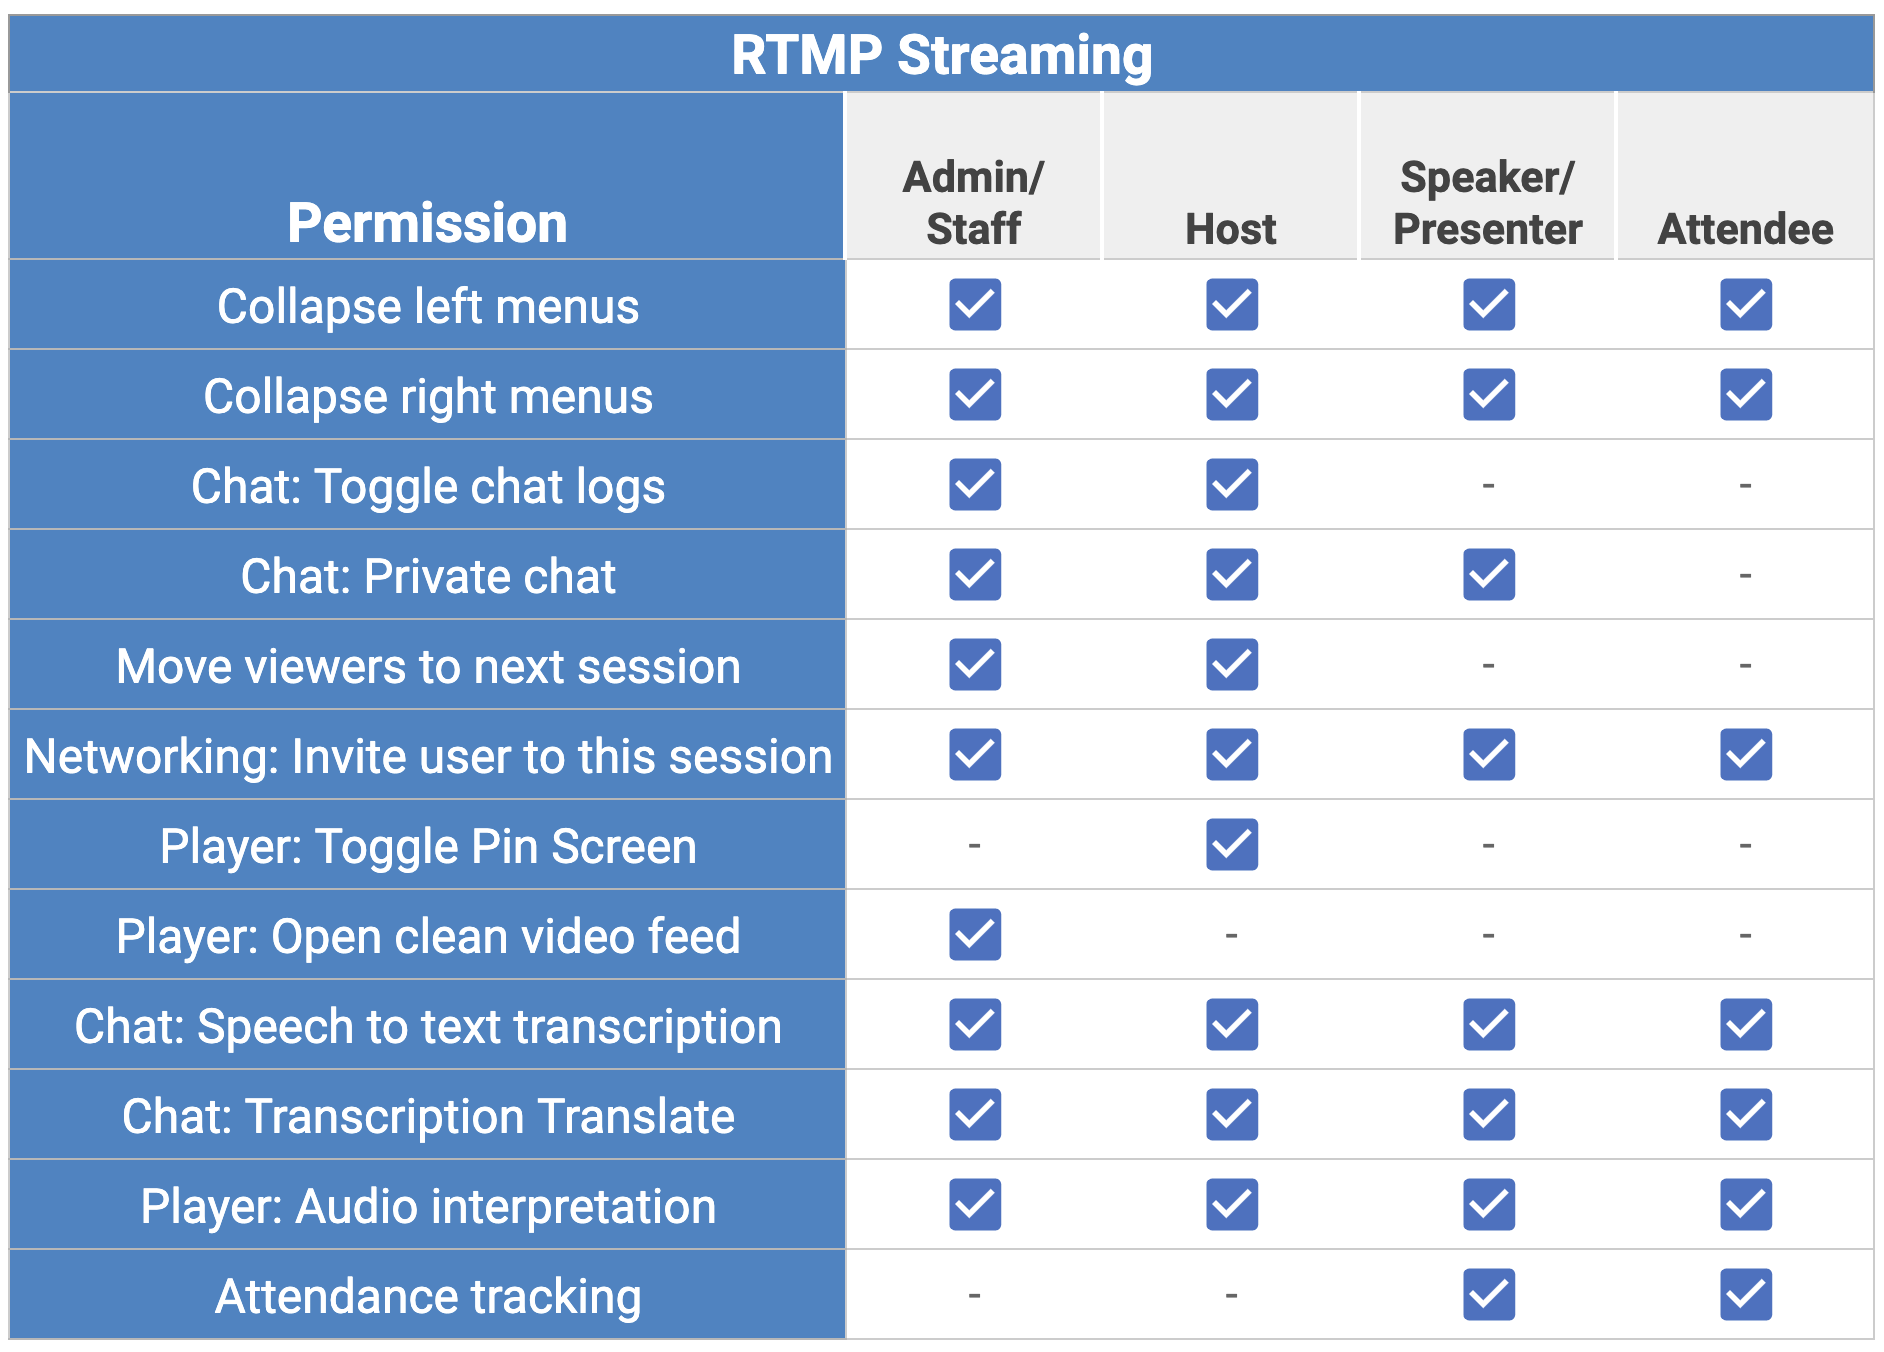 Table showing what each permission level can do in RTMP Streaming